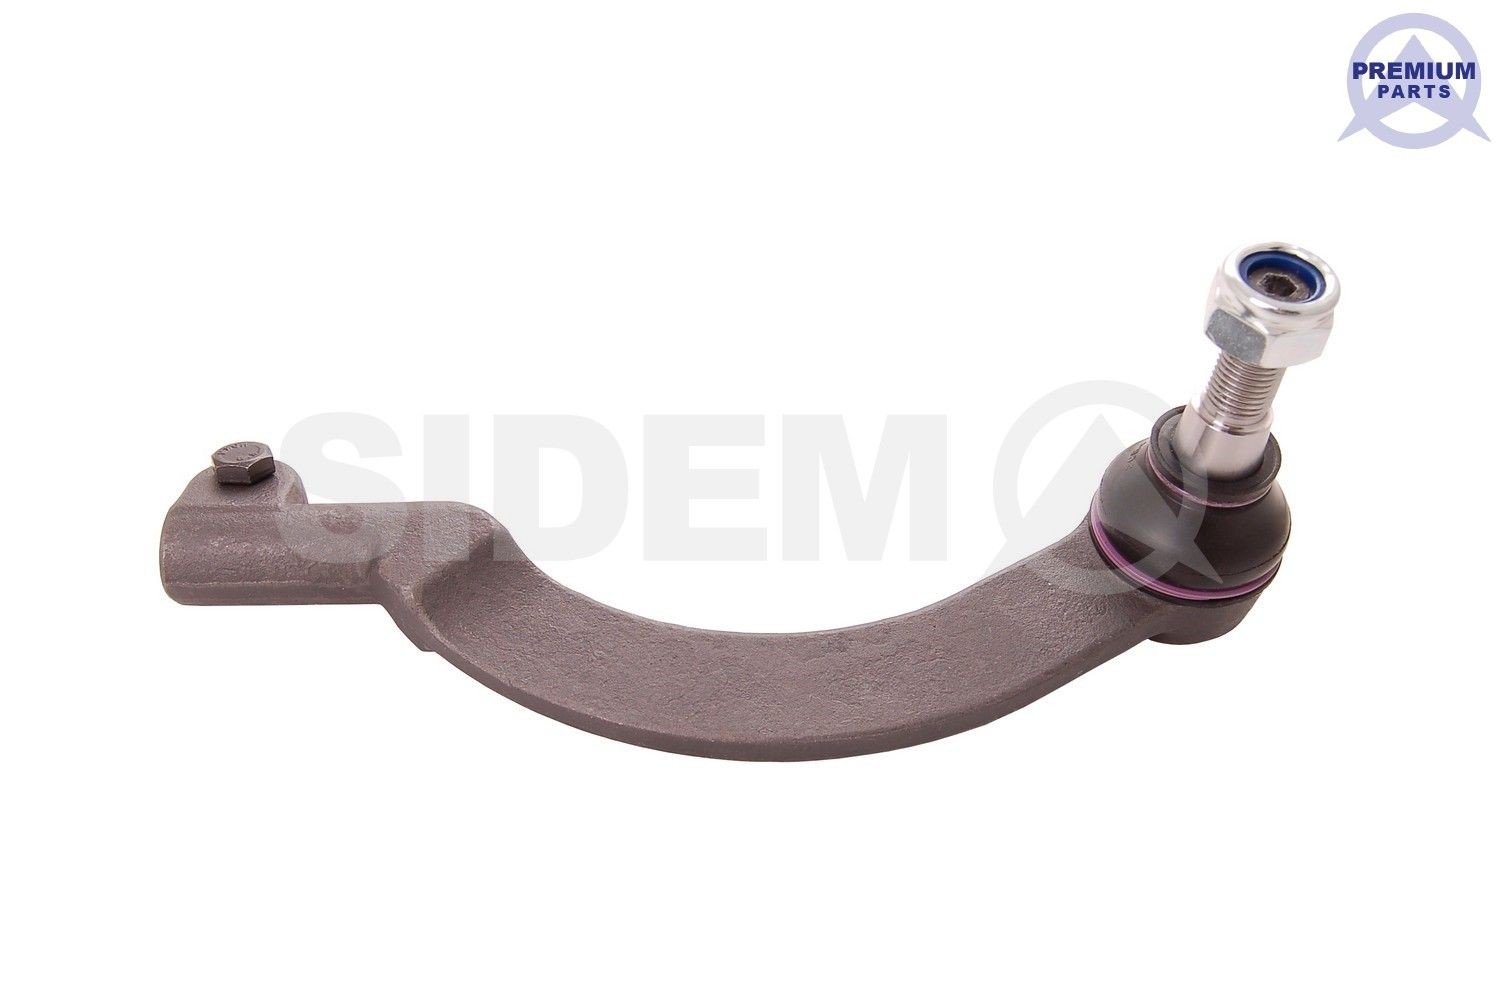 SIDEM Cone Size 16,4 mm, Front Axle Right Cone Size: 16,4mm, Thread Size: FM16X1,5R Tie rod end 6533 buy